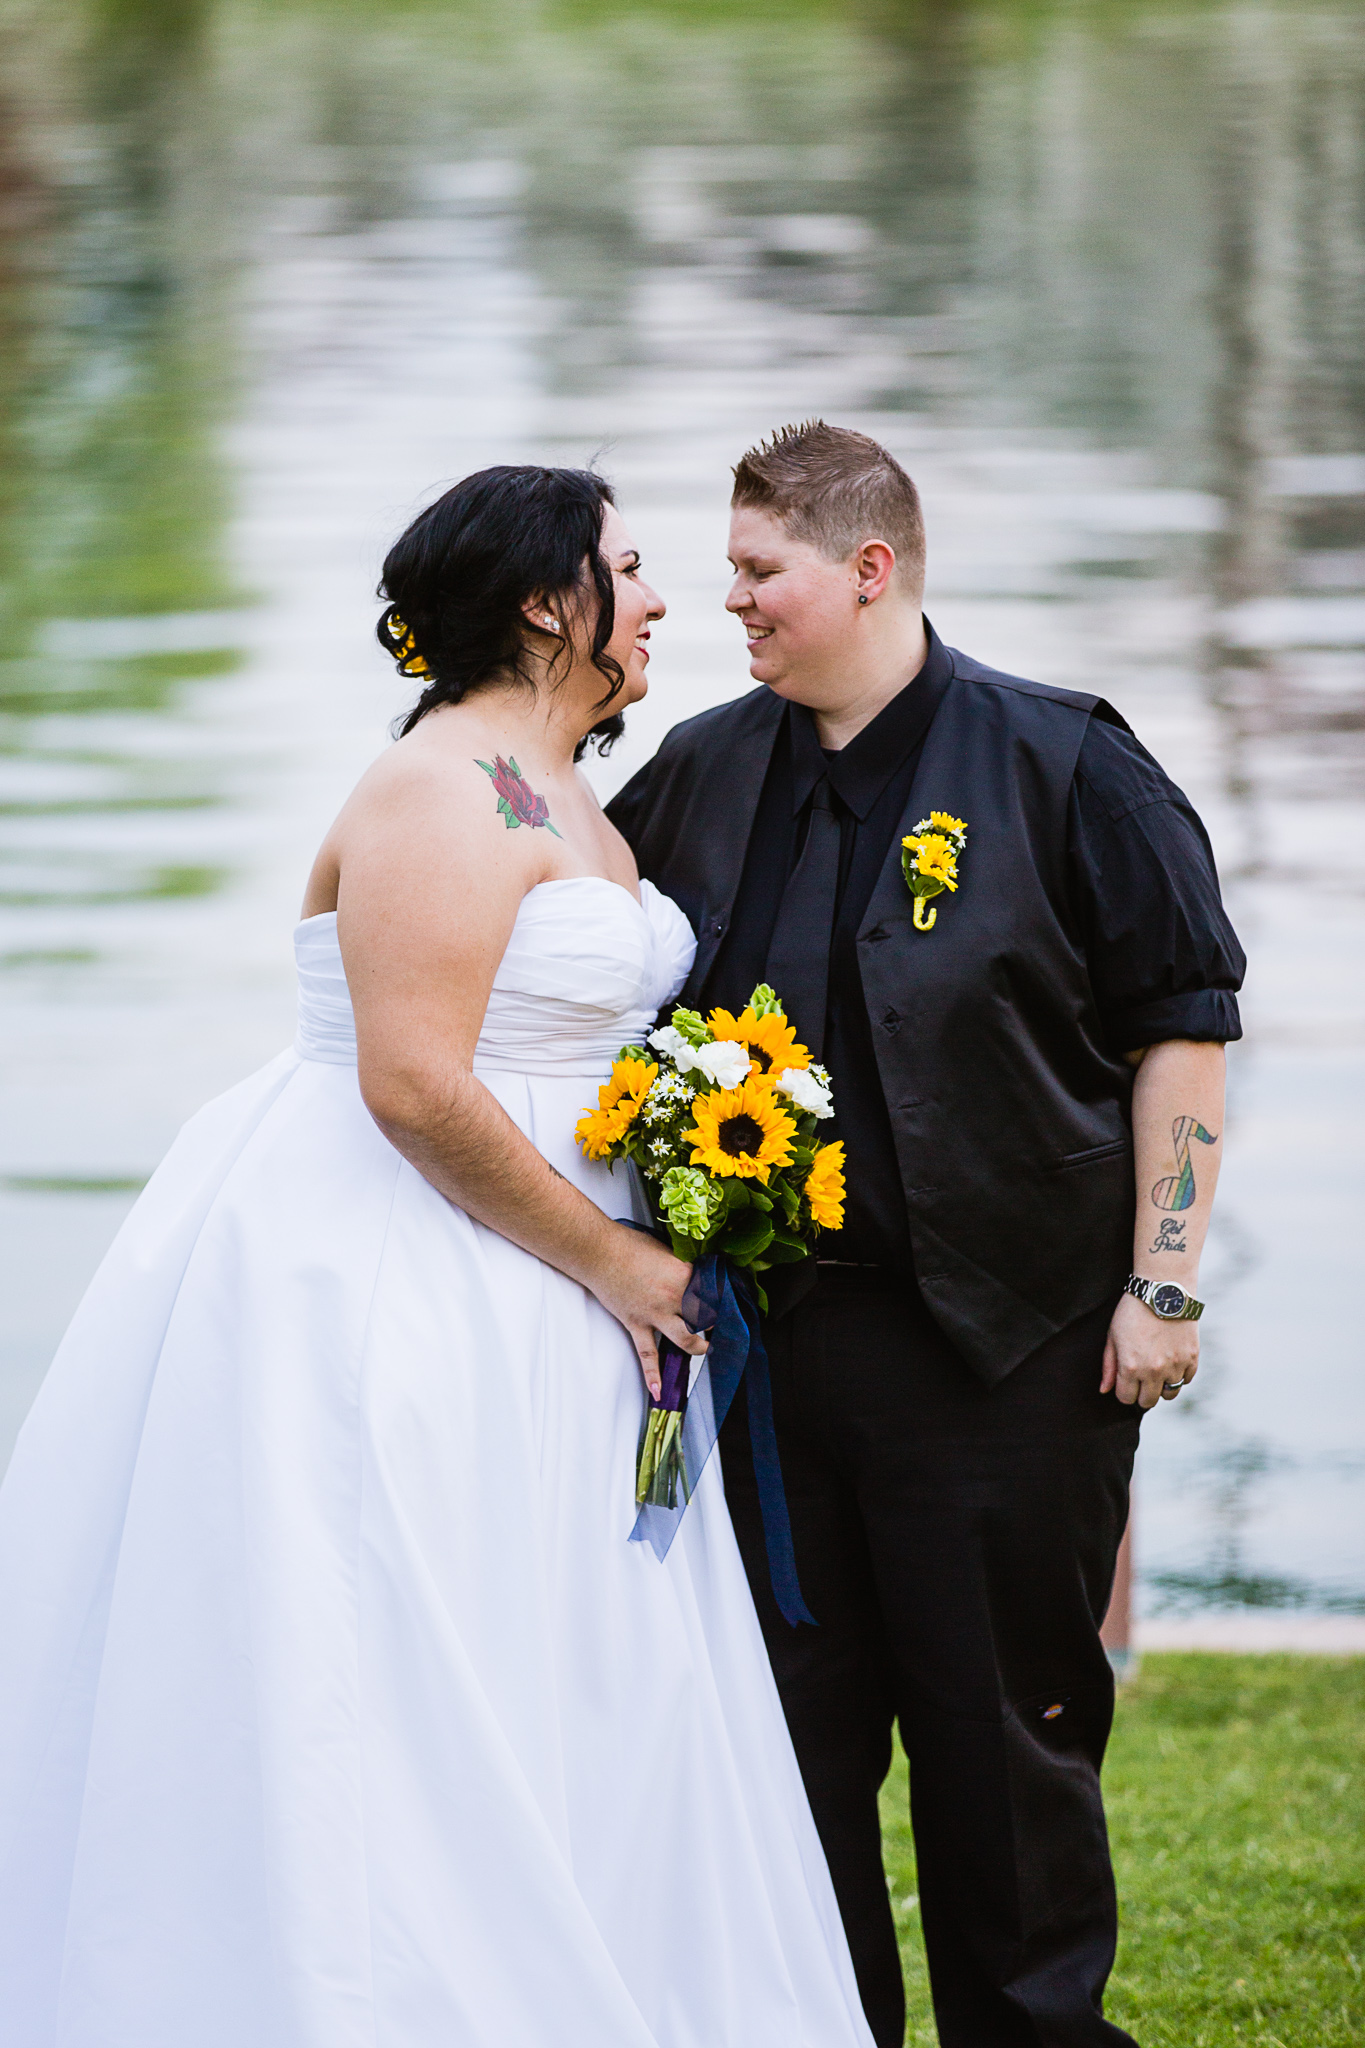 LGBT couple in front of a small lake on their wedding day by Phoenix wedding photographers PMA Photography.